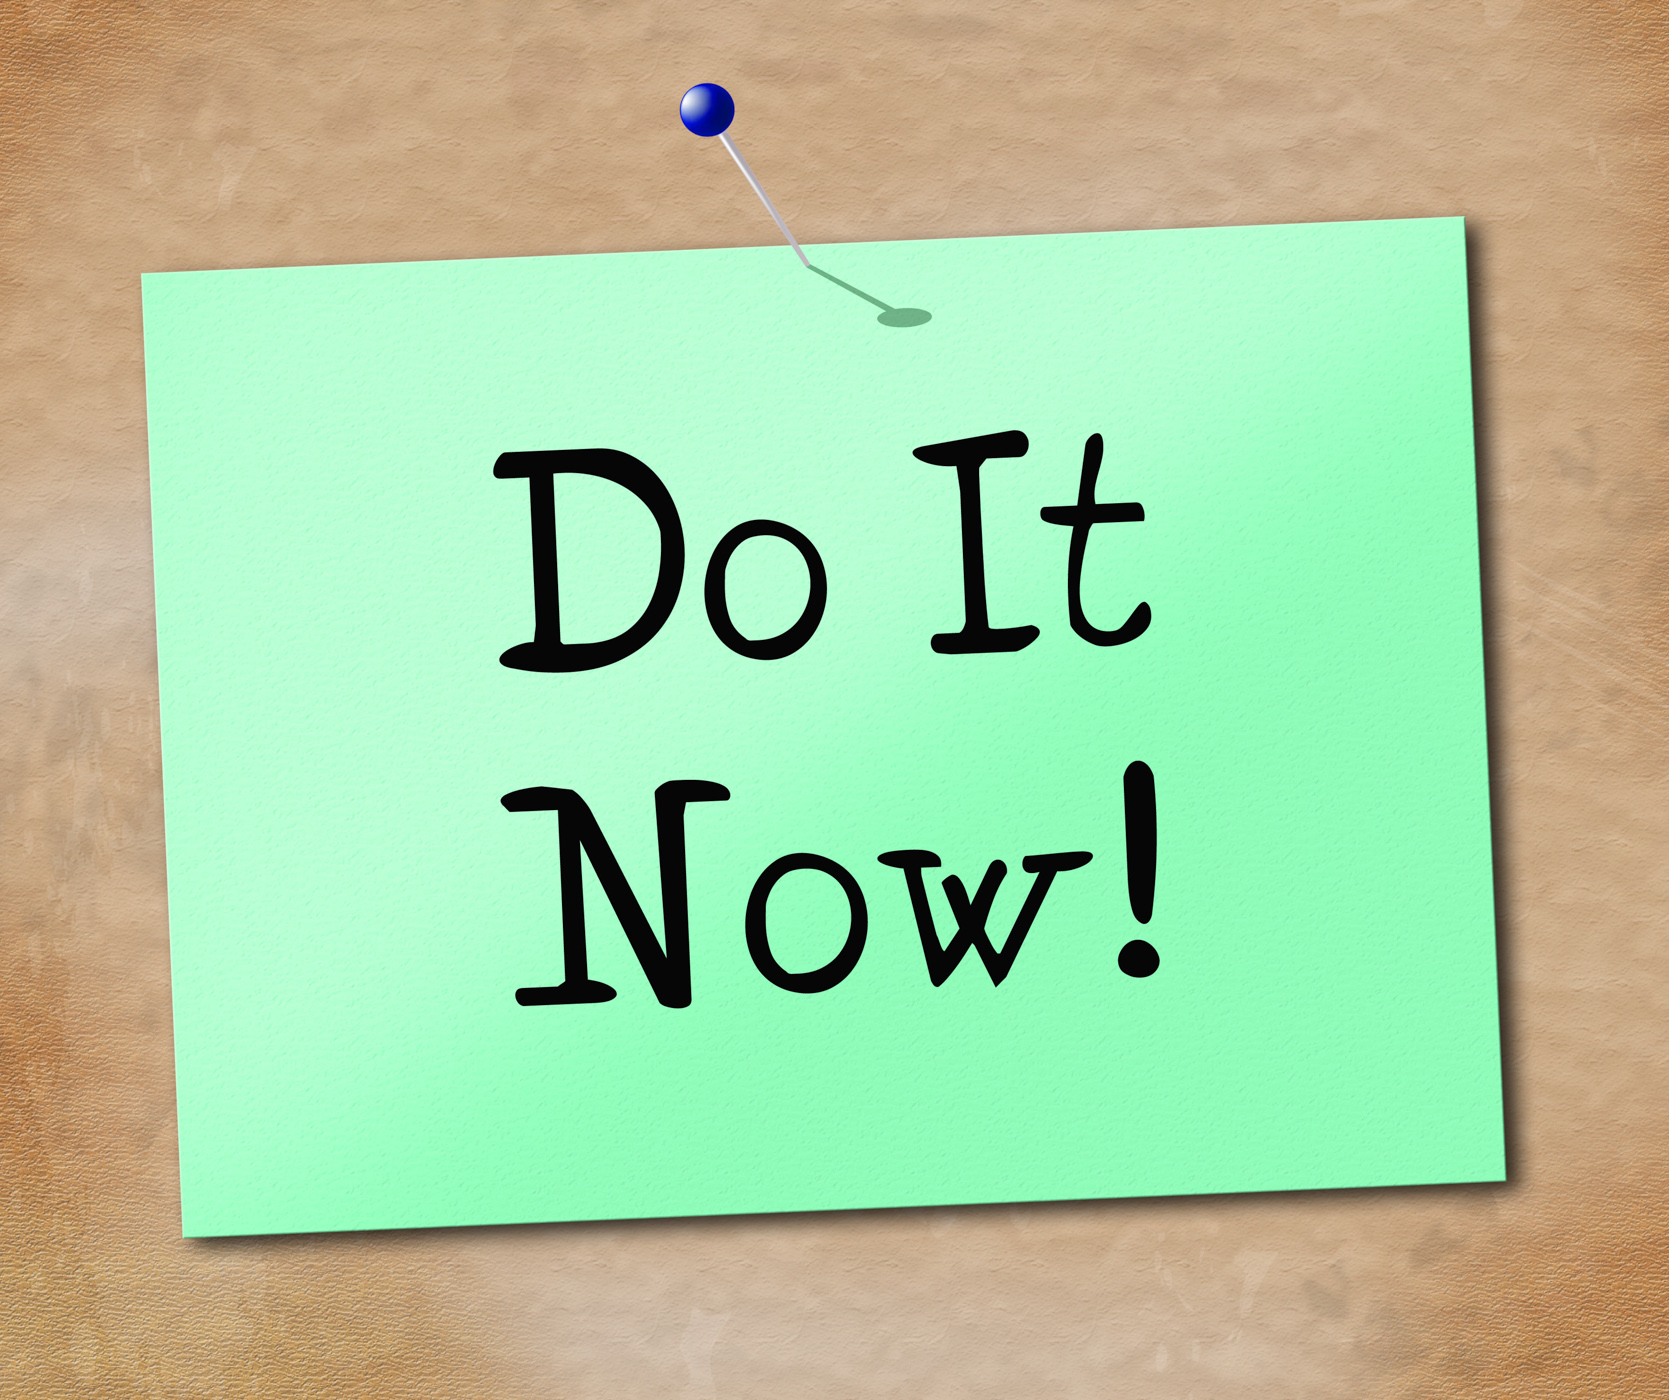 Do It Now Shows At This Time And Act, Act, Doit, Rightnow, Proactive, HQ Photo